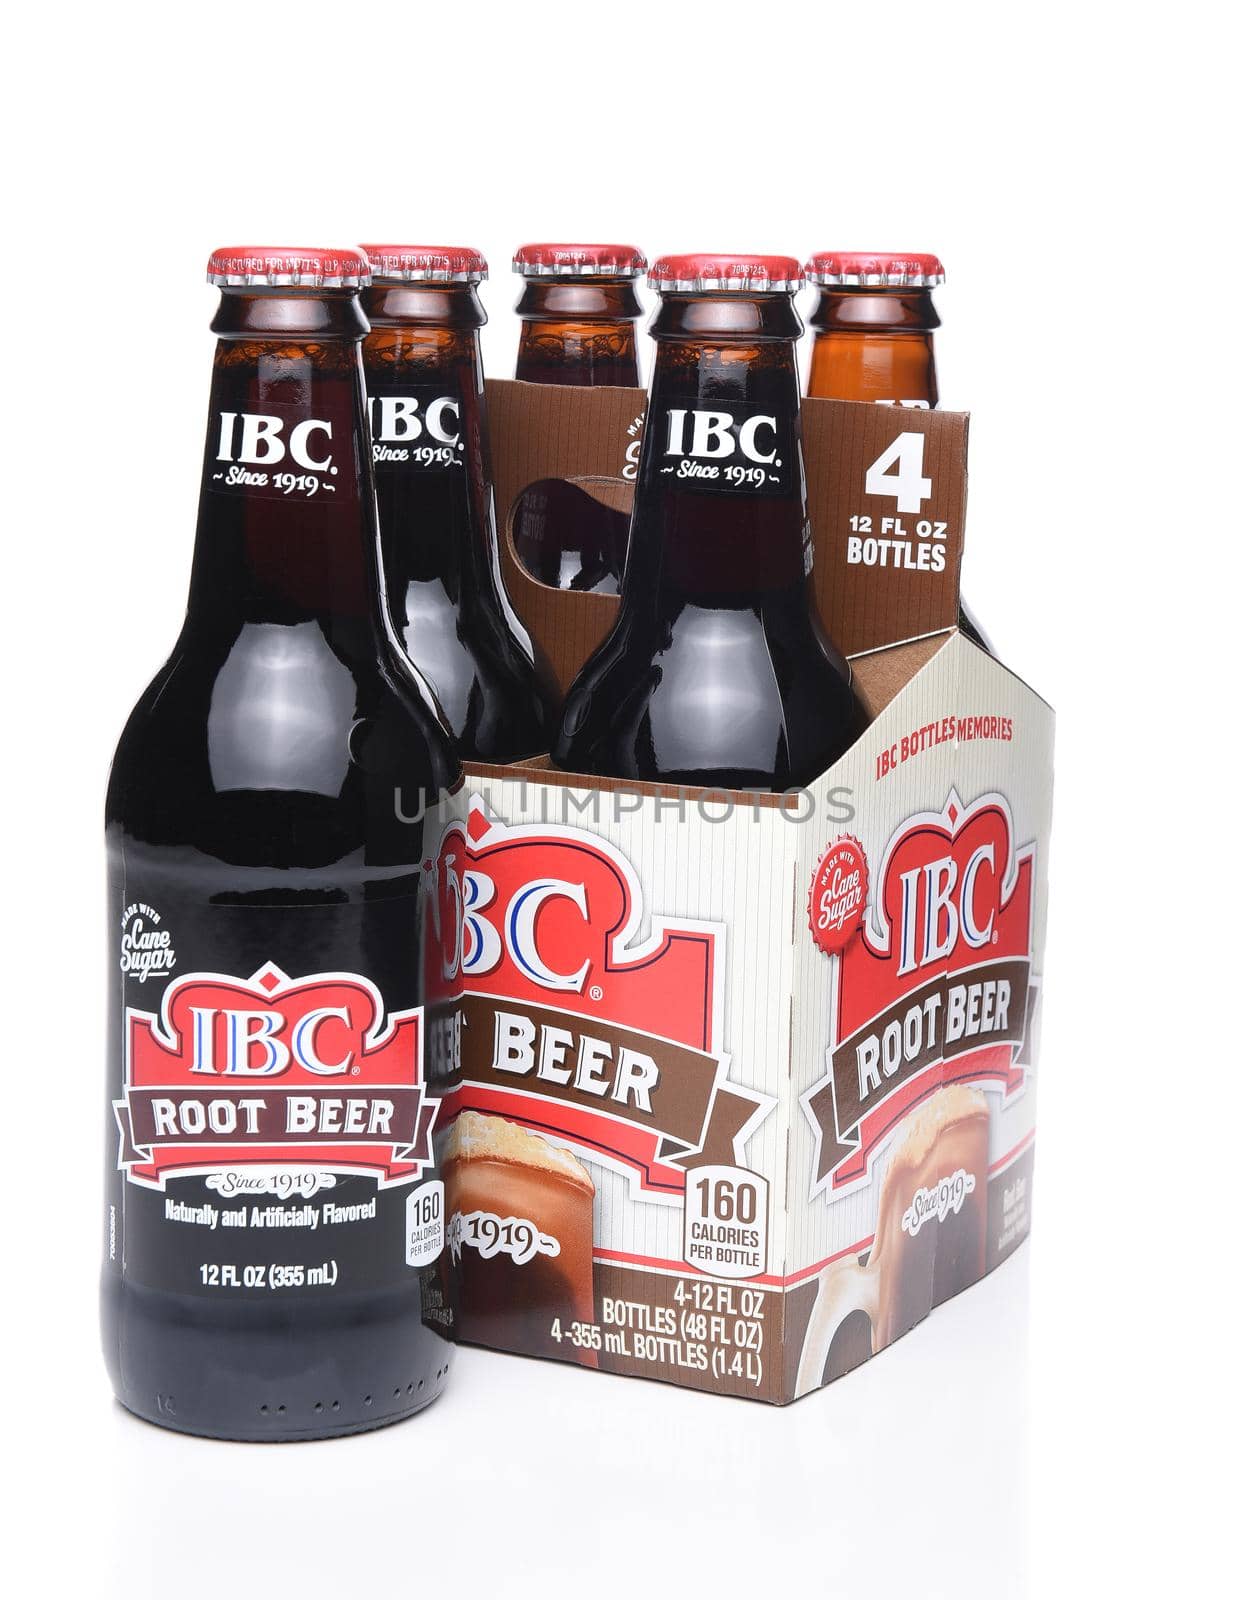 IRVINE, CA - MAY 29, 2017: IBC Root Beer 4 Pack. IBC Root Beer was founded in 1919 by the Griesedieck family as the Independent Breweries Company in St. Louis, Missouri.